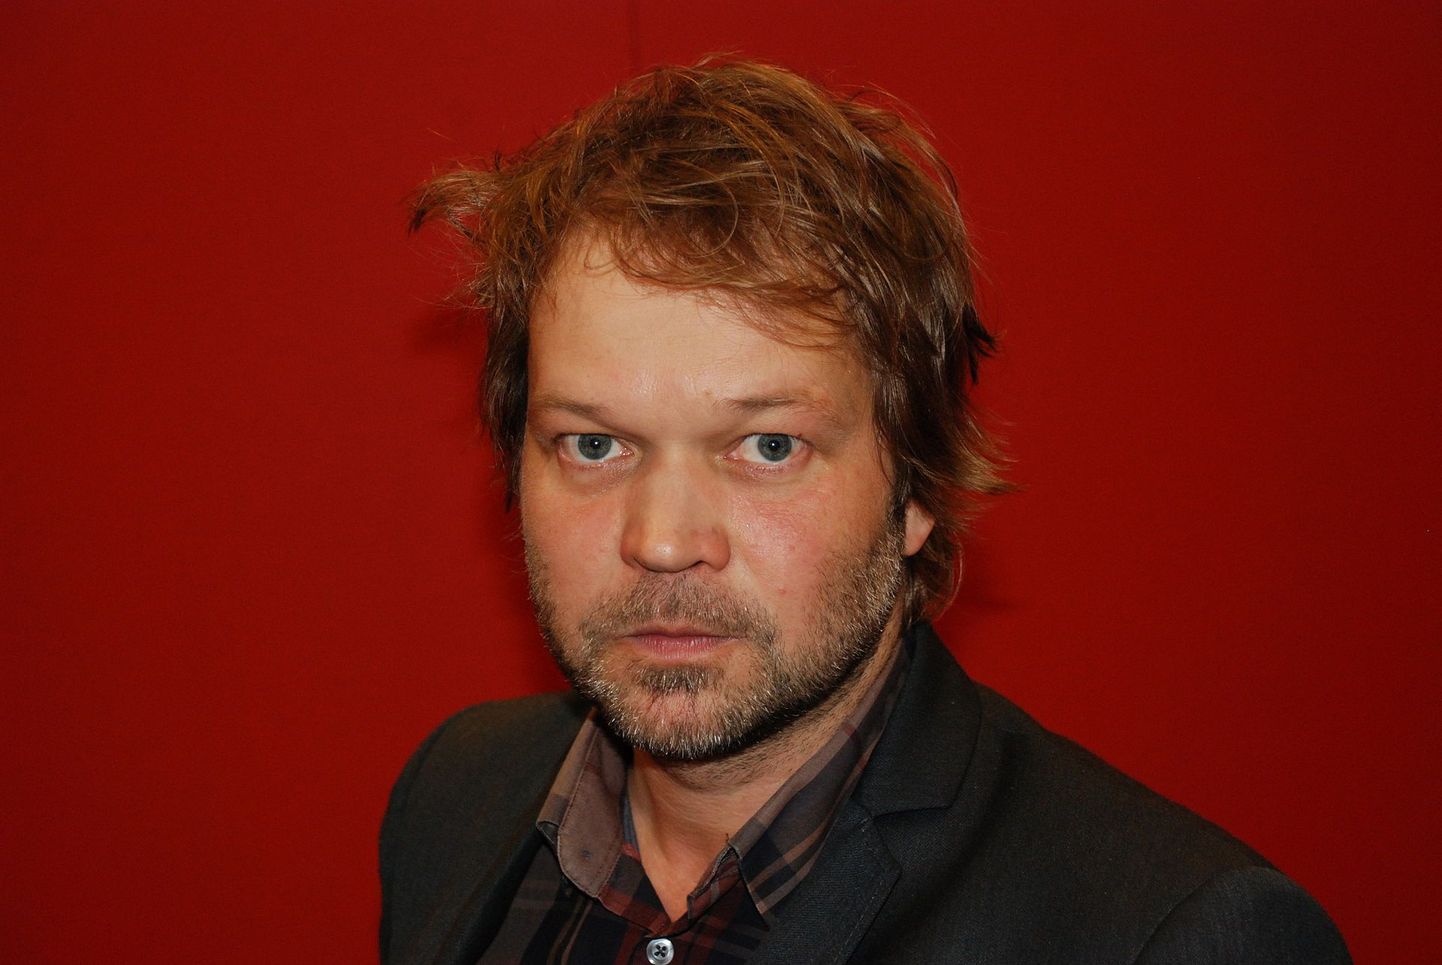 Tomas Bannerhed